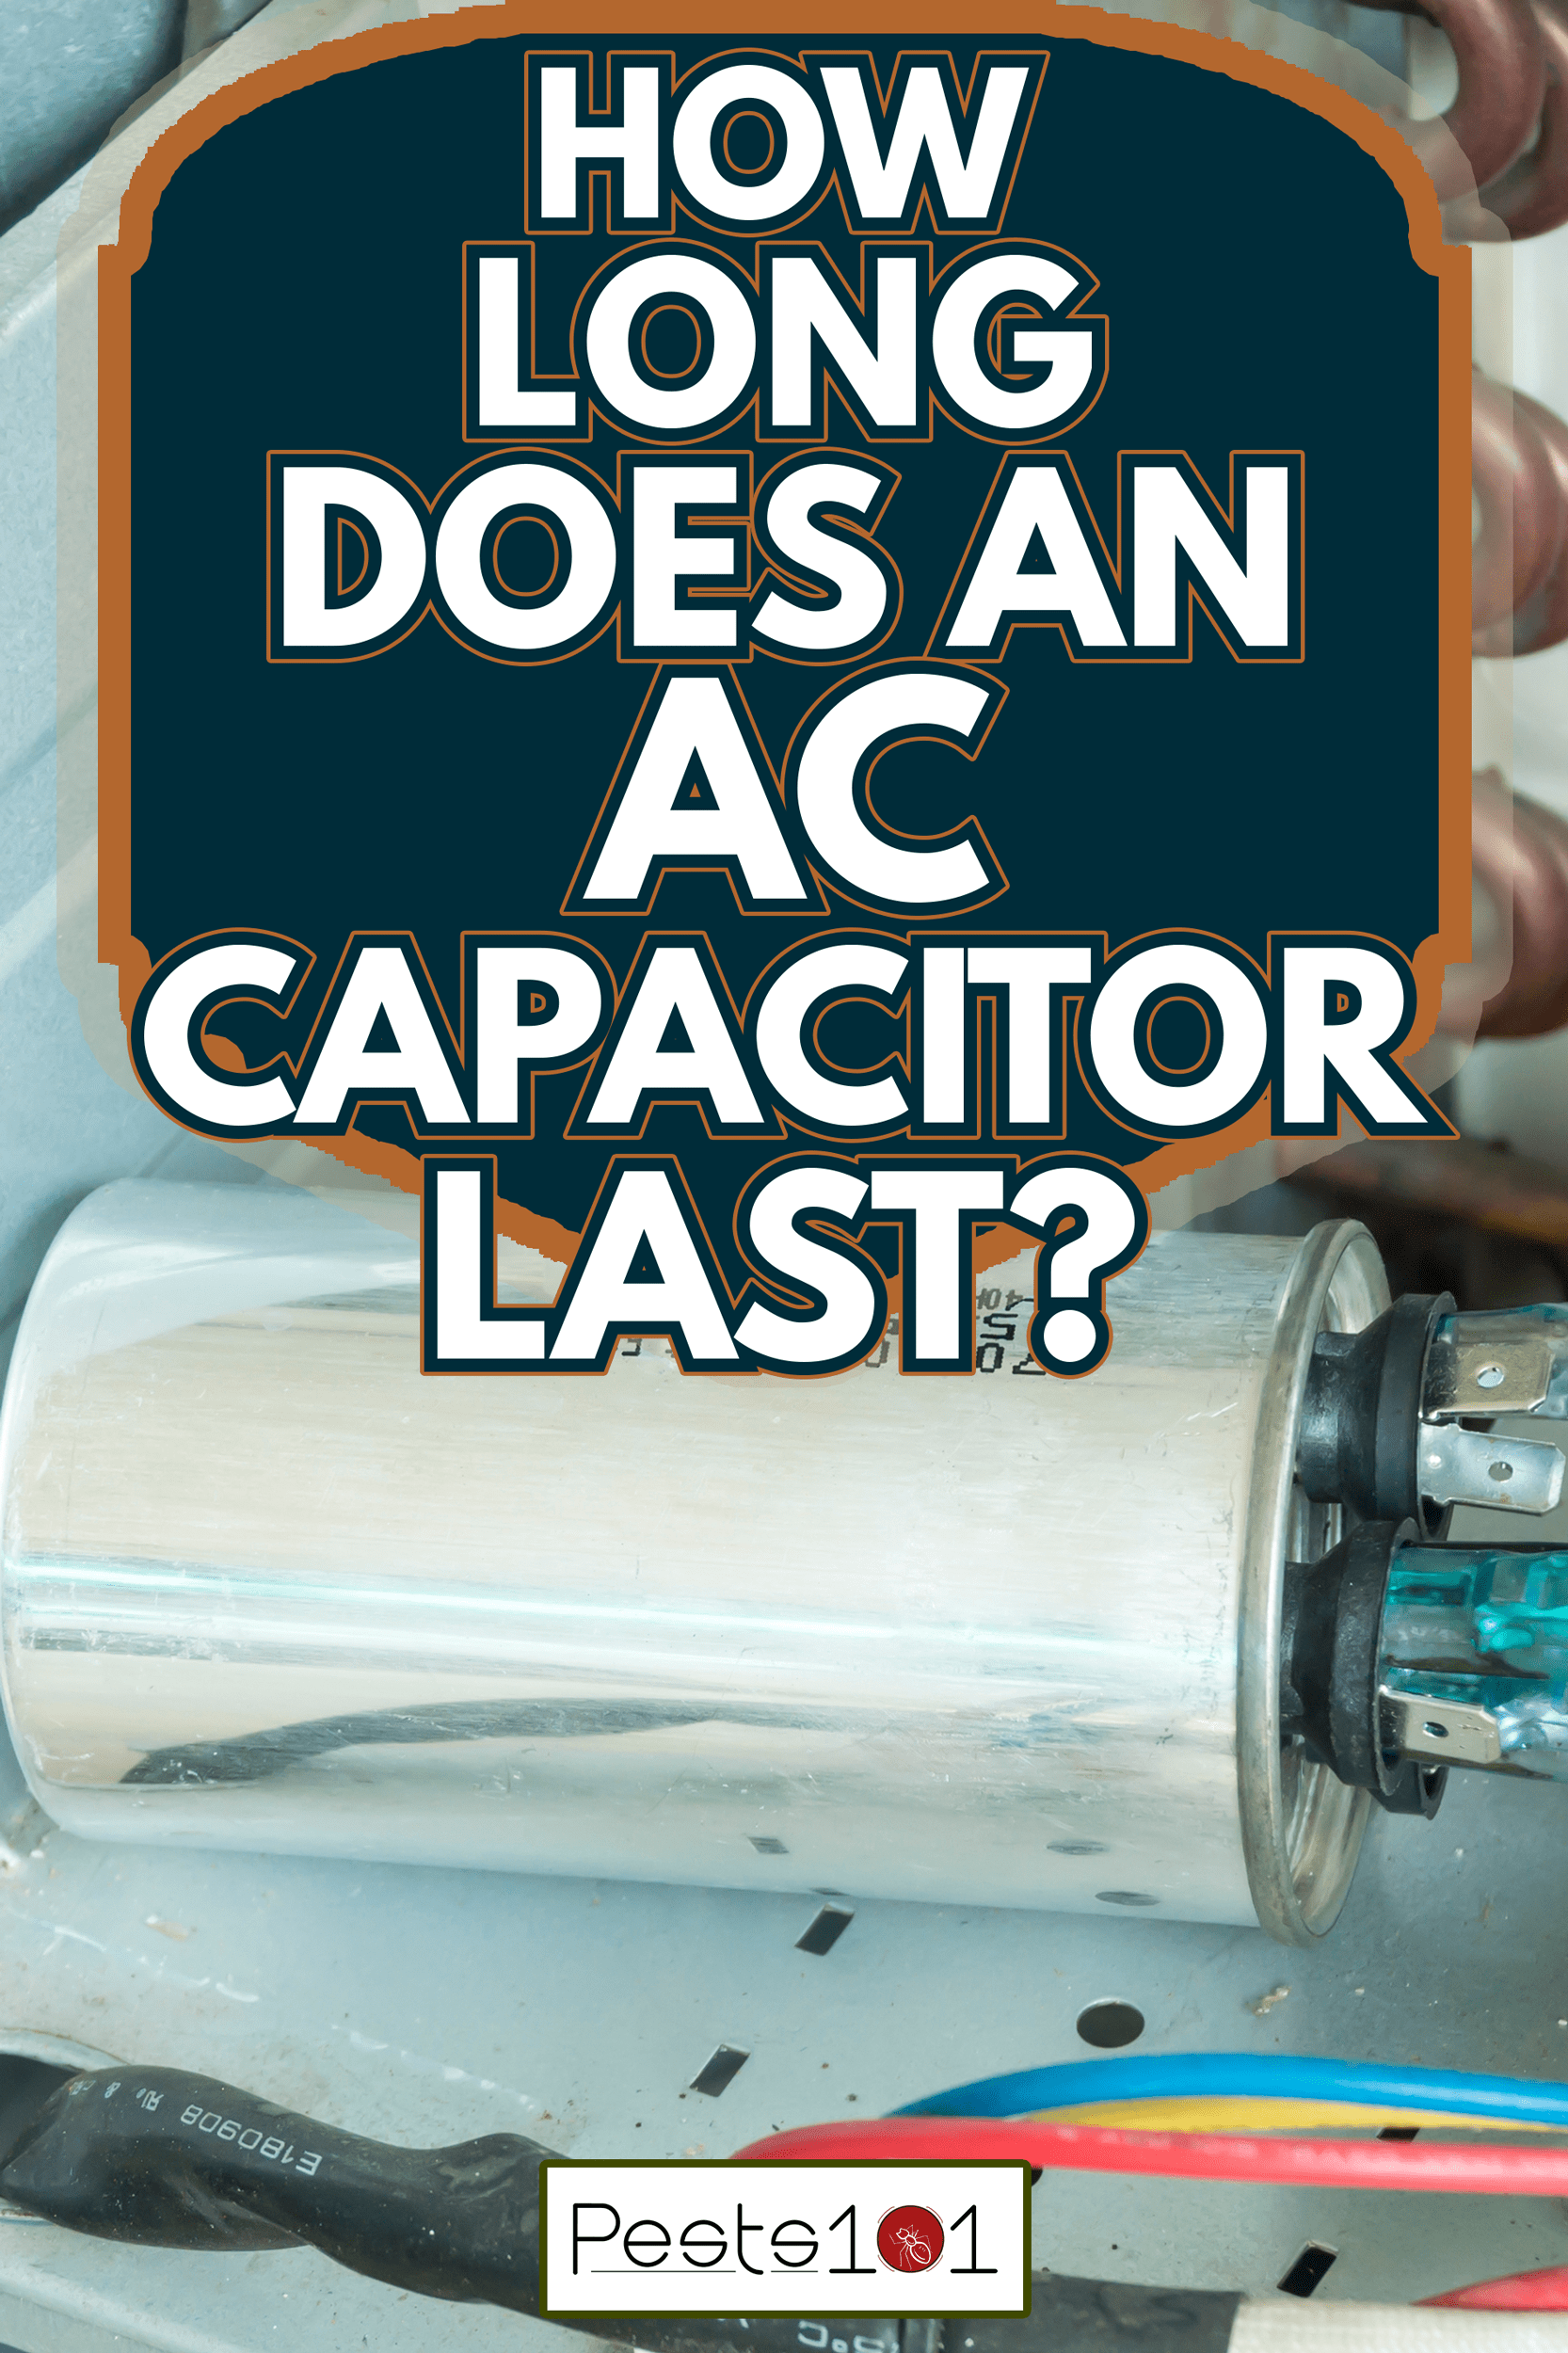 Air conditioner capacitor, Checking air compressor capacitor, Home appliances repair service - How Long Does An AC Capacitor Last